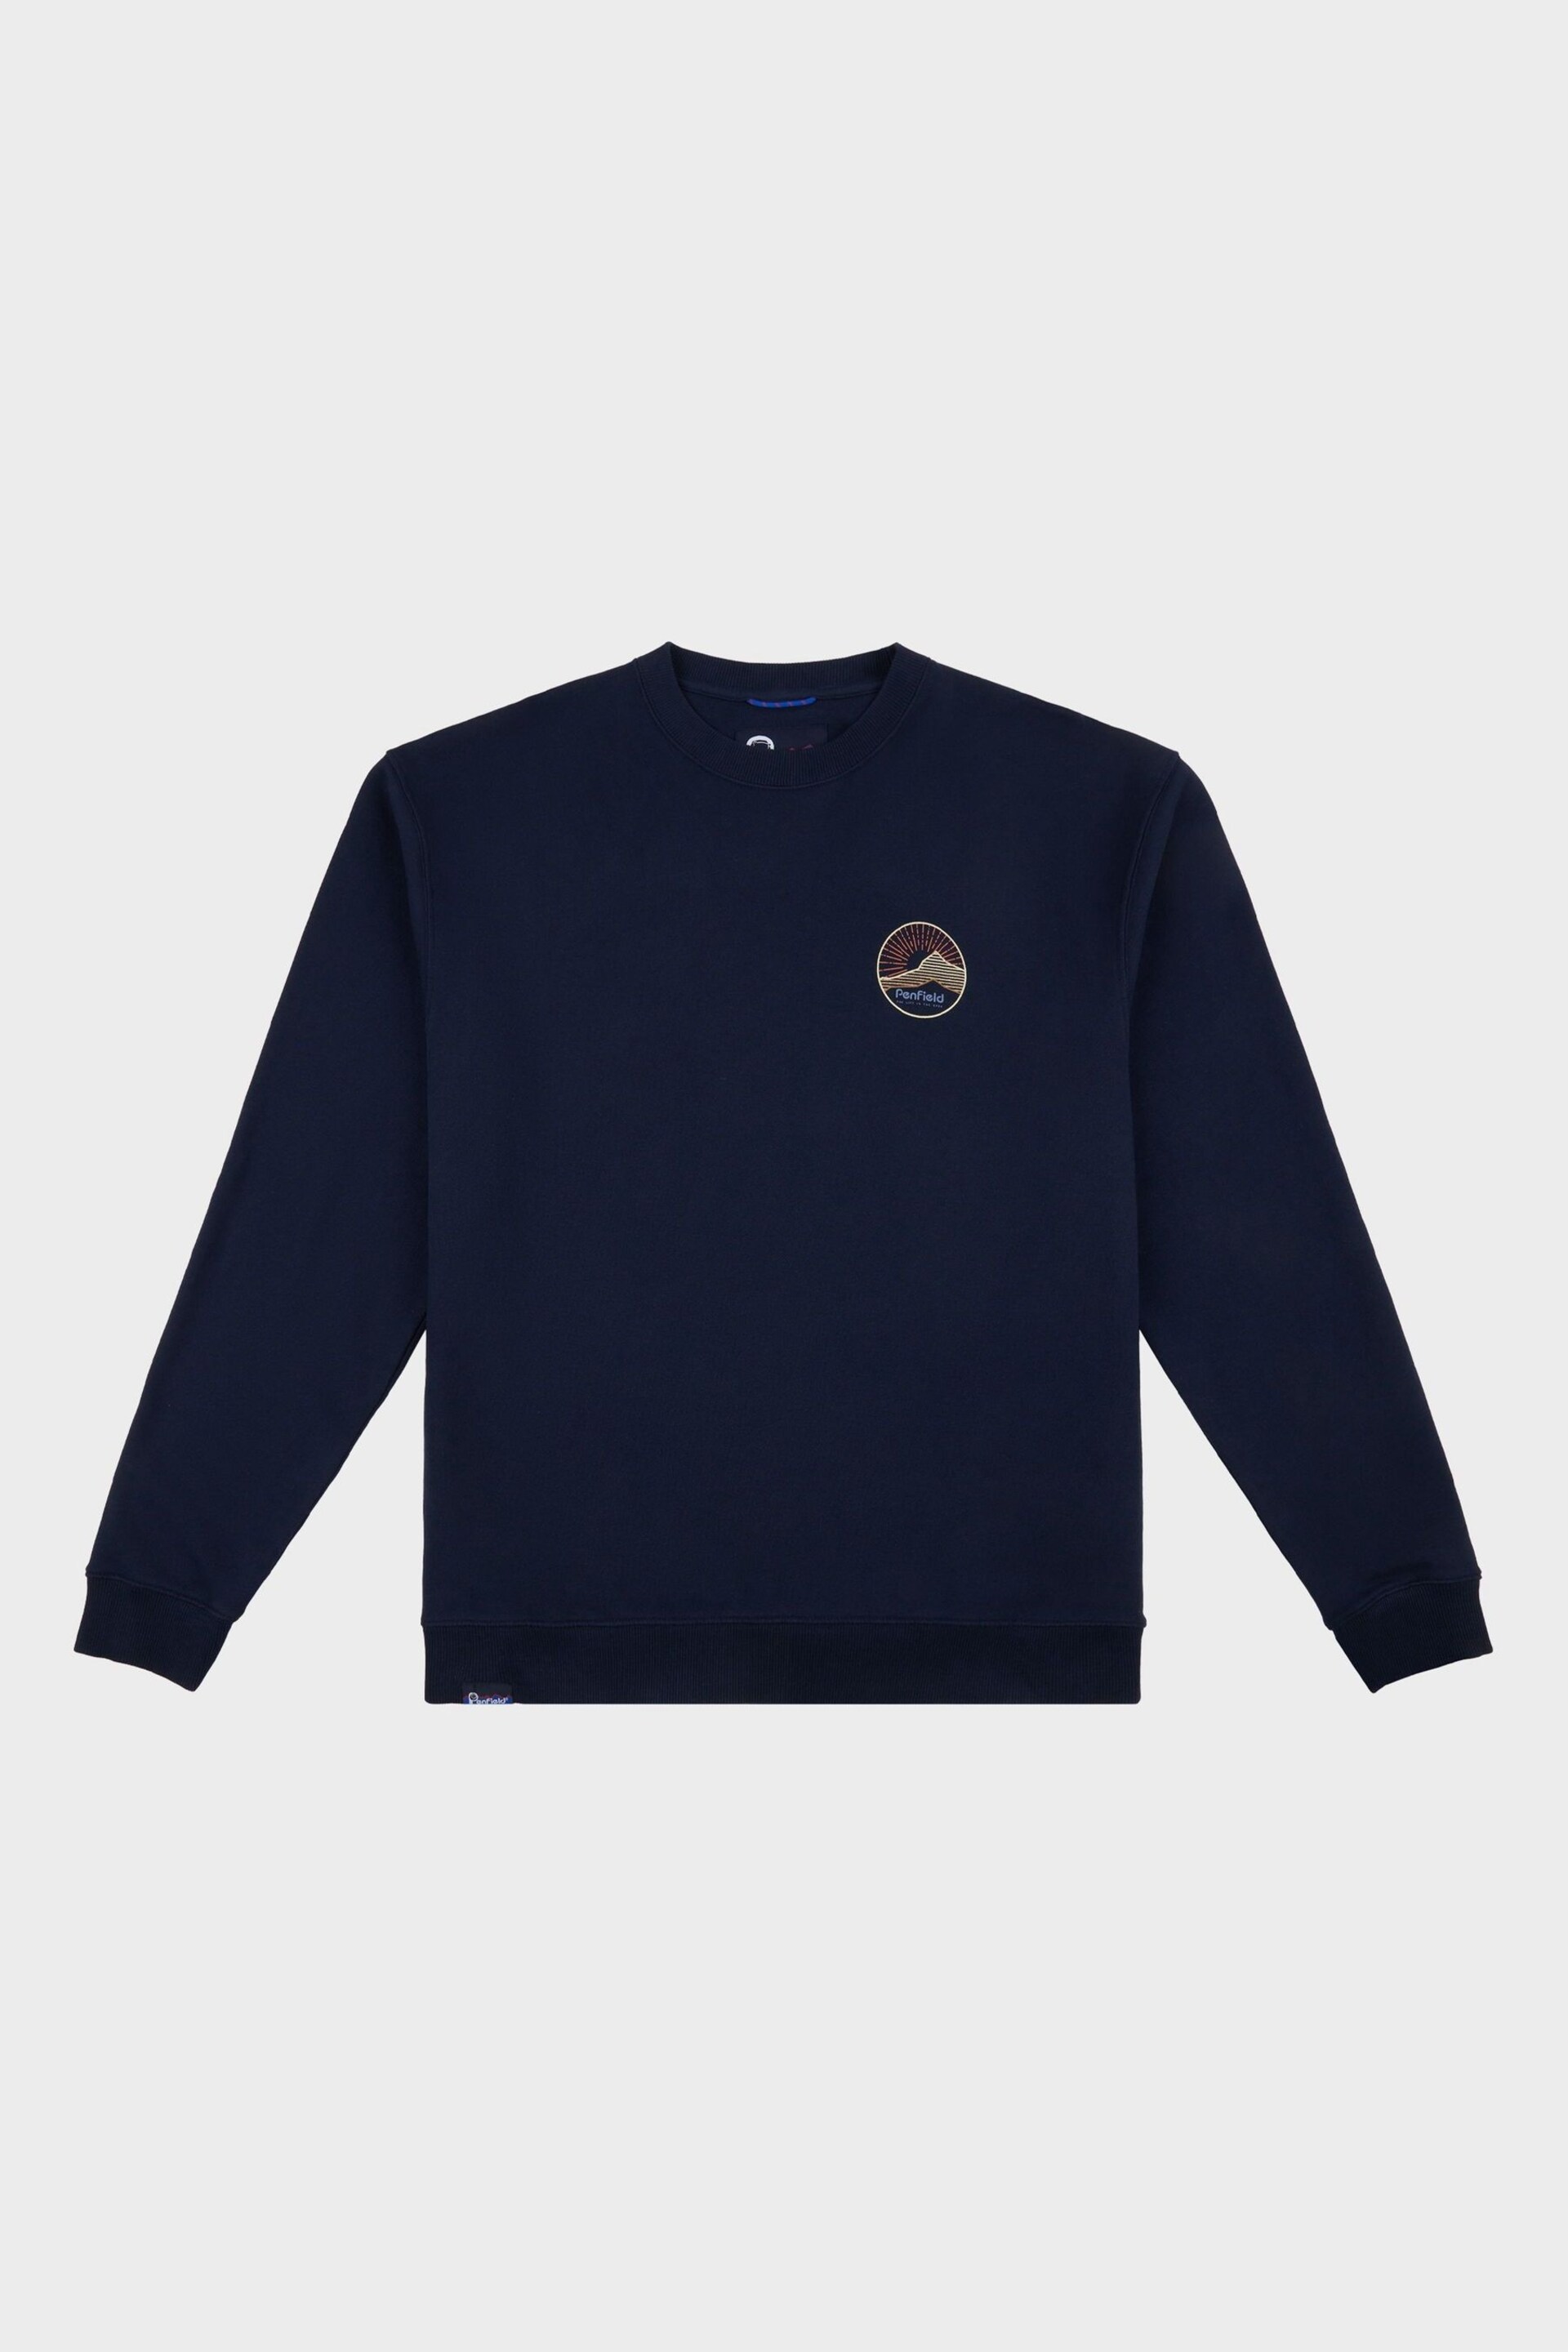 Penfield Mens Relaxed Fit Blue Circle Mountain Sweatshirt - Image 6 of 8